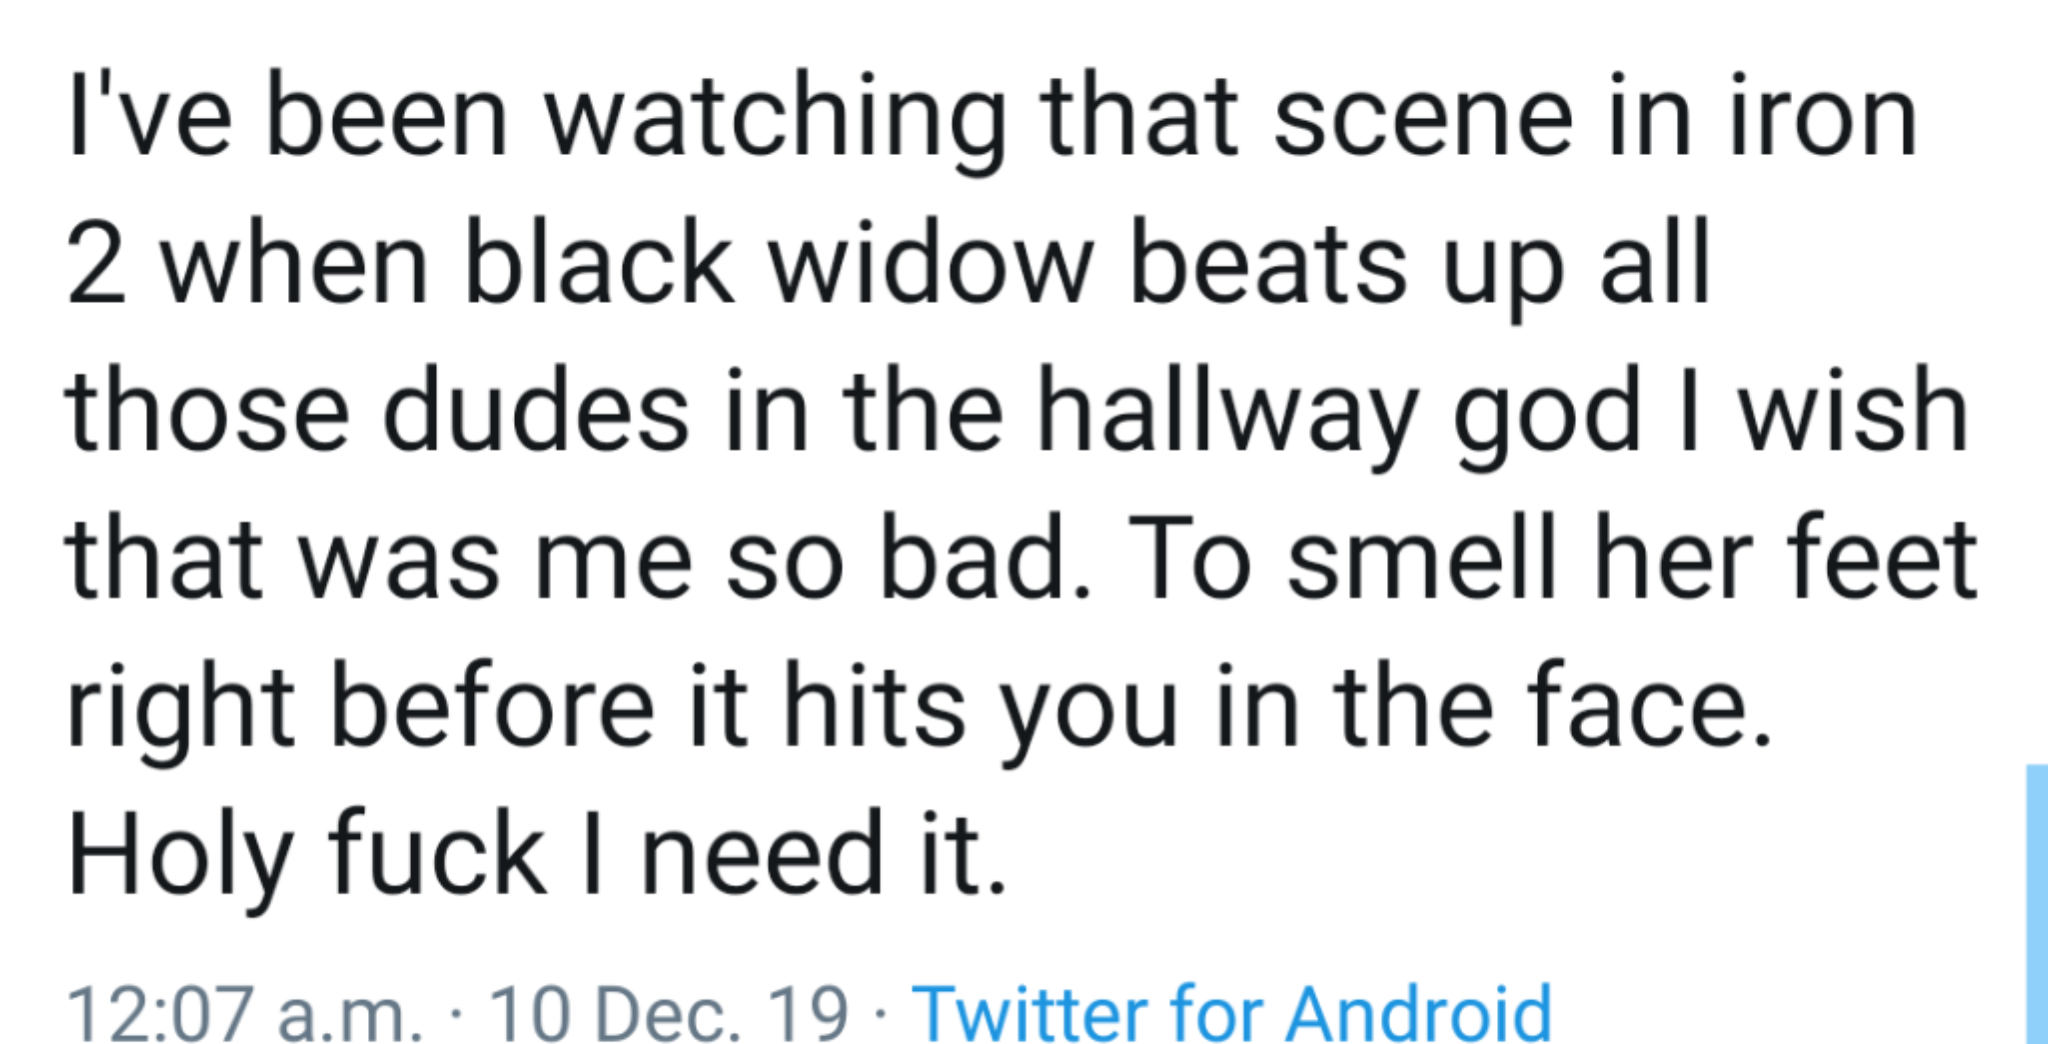 handwriting - I've been watching that scene in iron 2 when black widow beats up all those dudes in the hallway god I wish that was me so bad. To smell her feet right before it hits you in the face. Holy fuck I need it. a.m. 10 Dec. 19. Twitter for Android